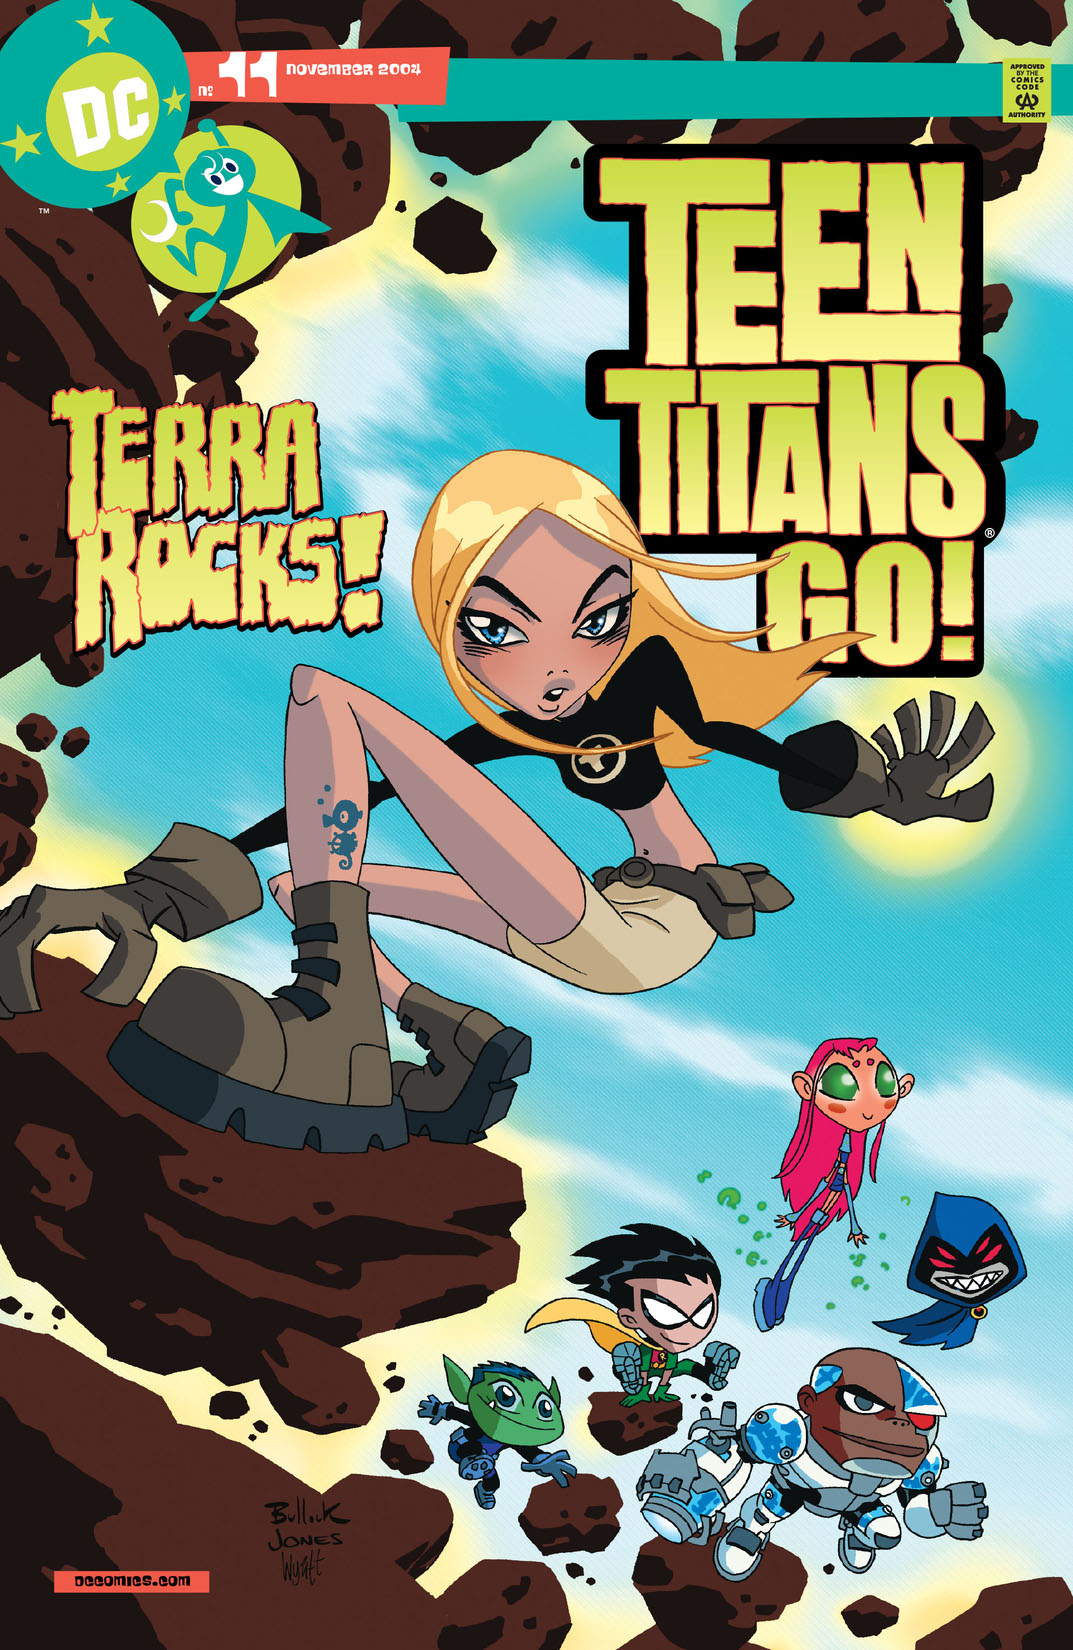 Teen Titans Go! (2003-) #11 preview images